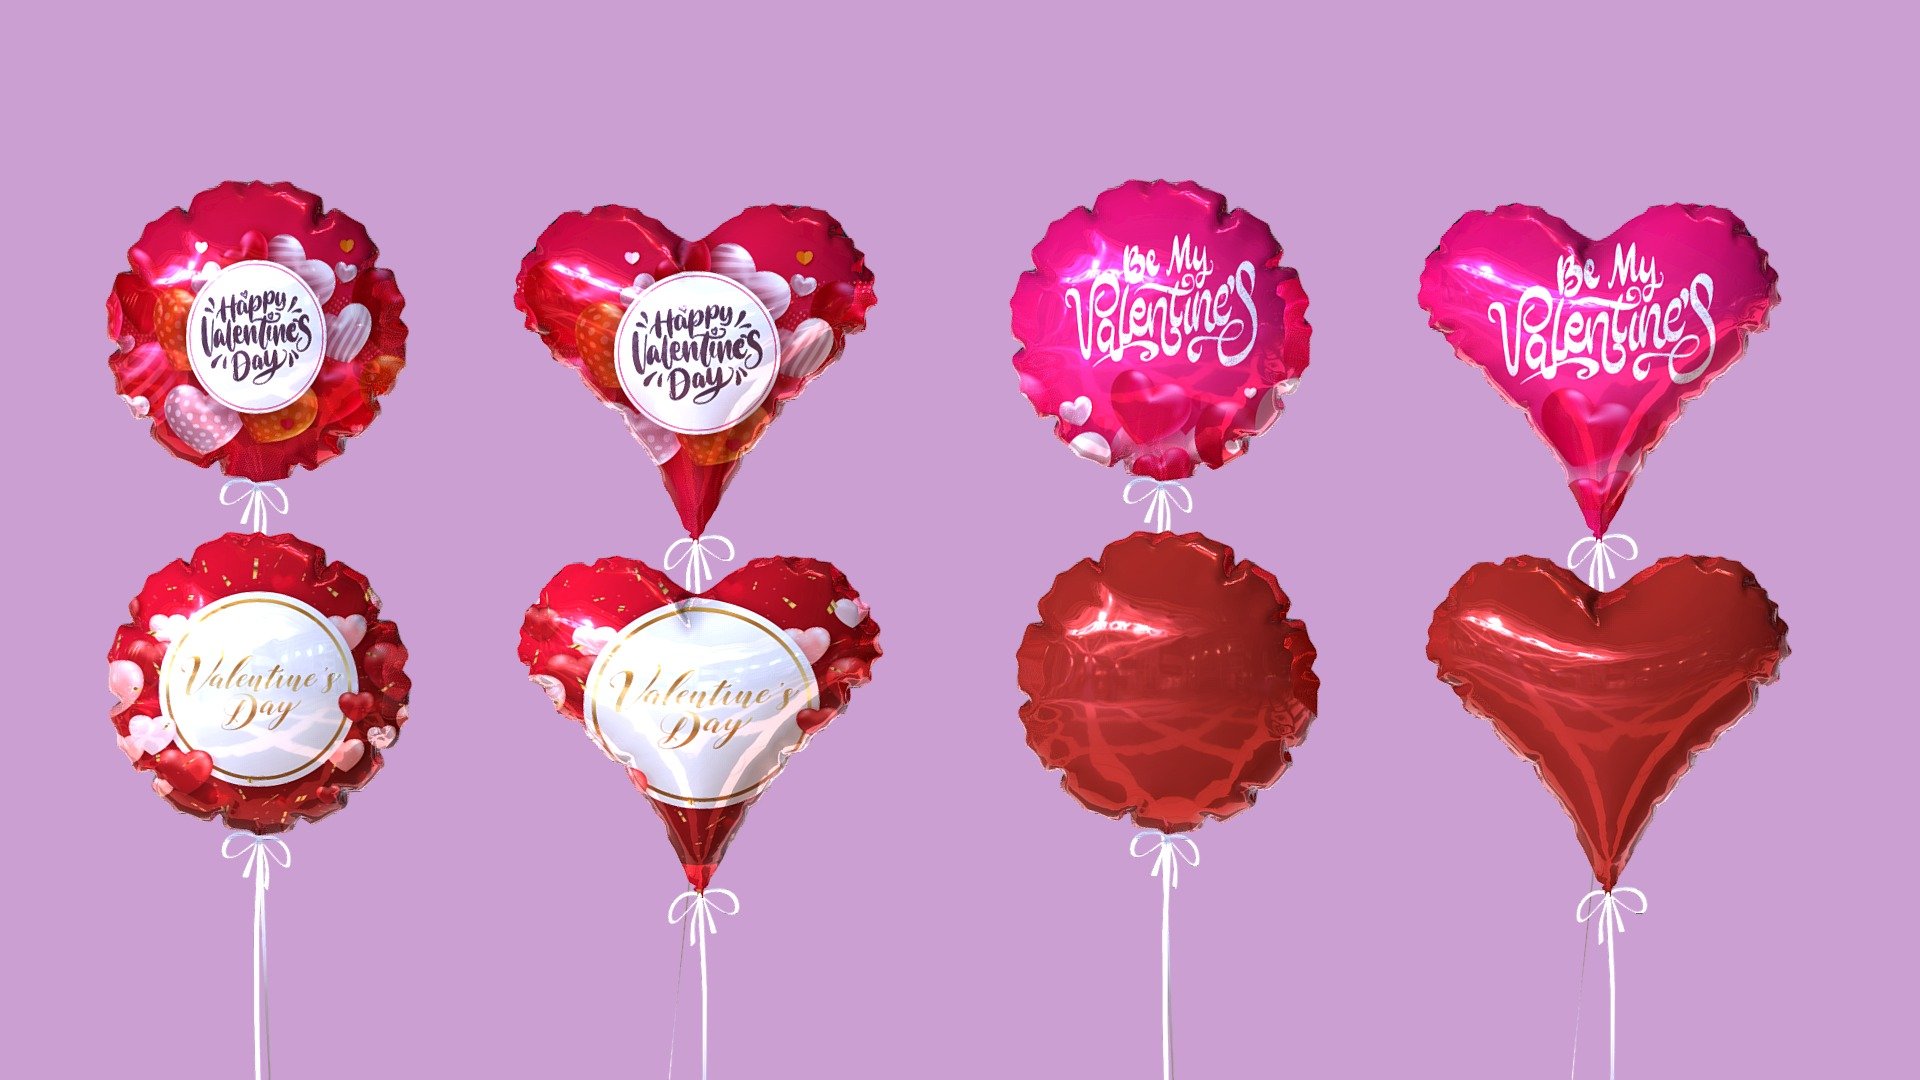 1 Heart Valentines Balloon model with 4 designs
1 Round Valentines Balloon models with 4 designs

High Poly and easy to swap colors, matertials, and designs 3d model